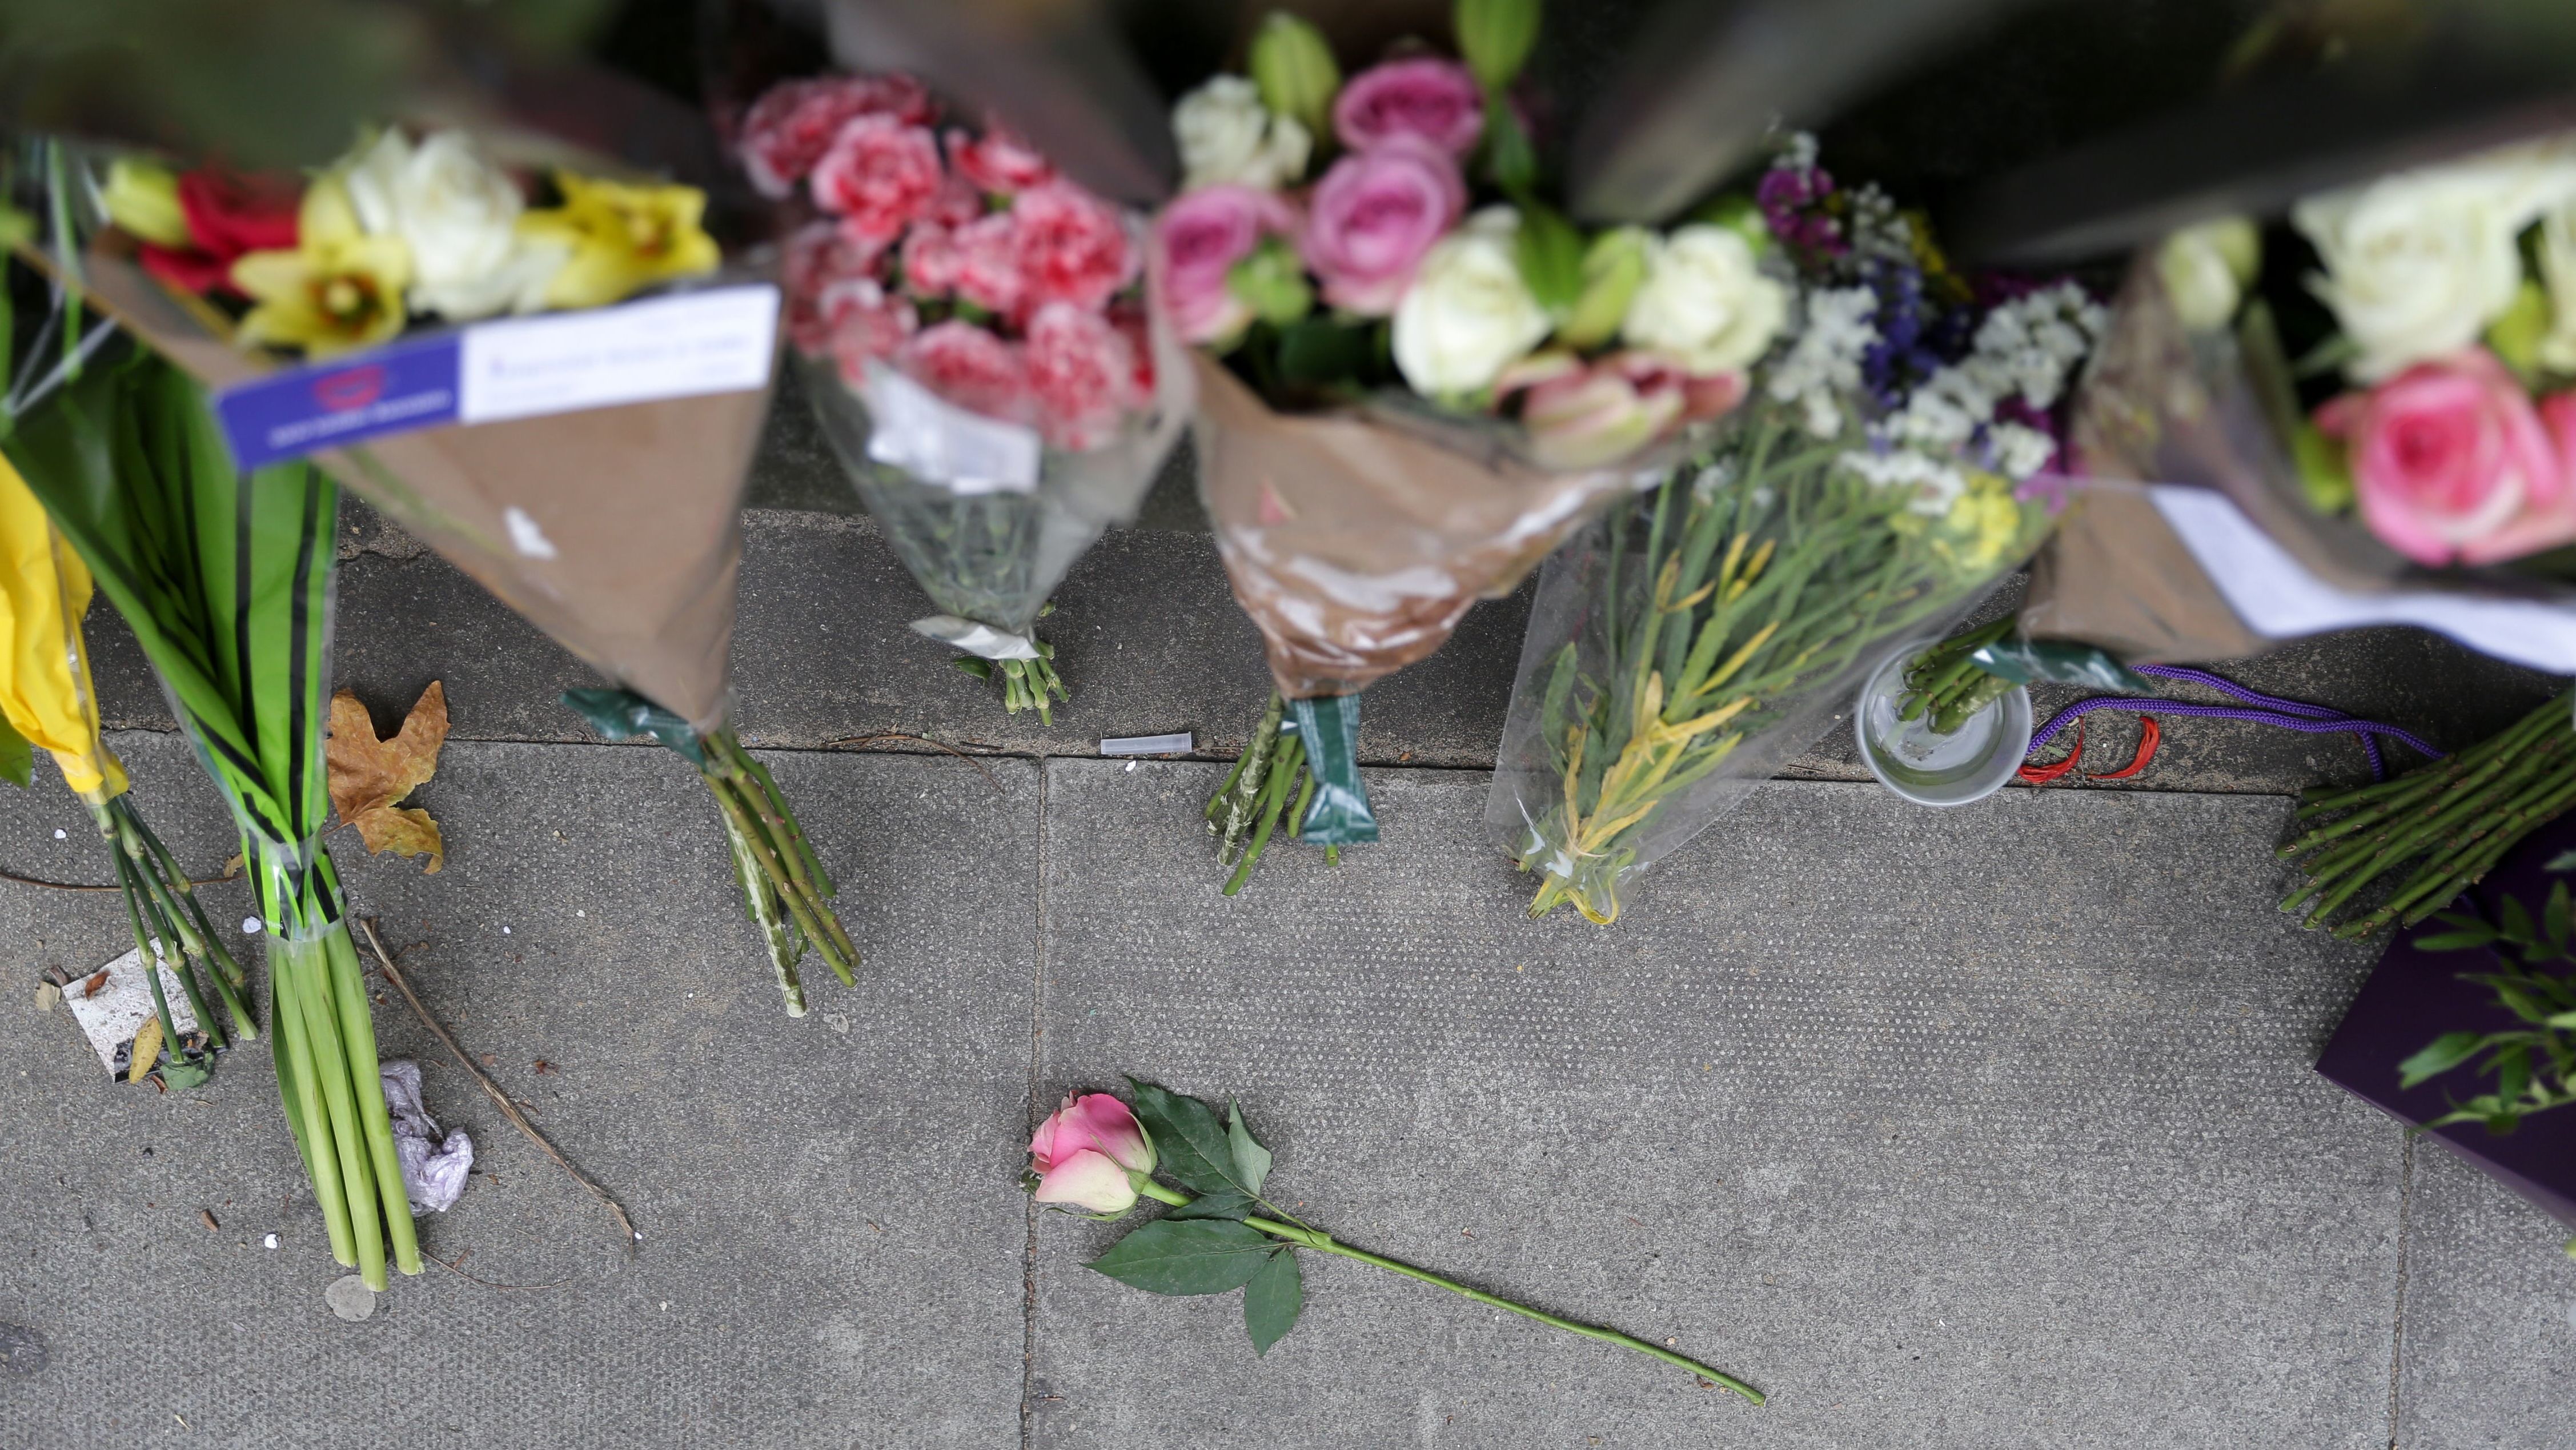 Flowers for stabbing victims are becoming a frequent sight on London's streets.